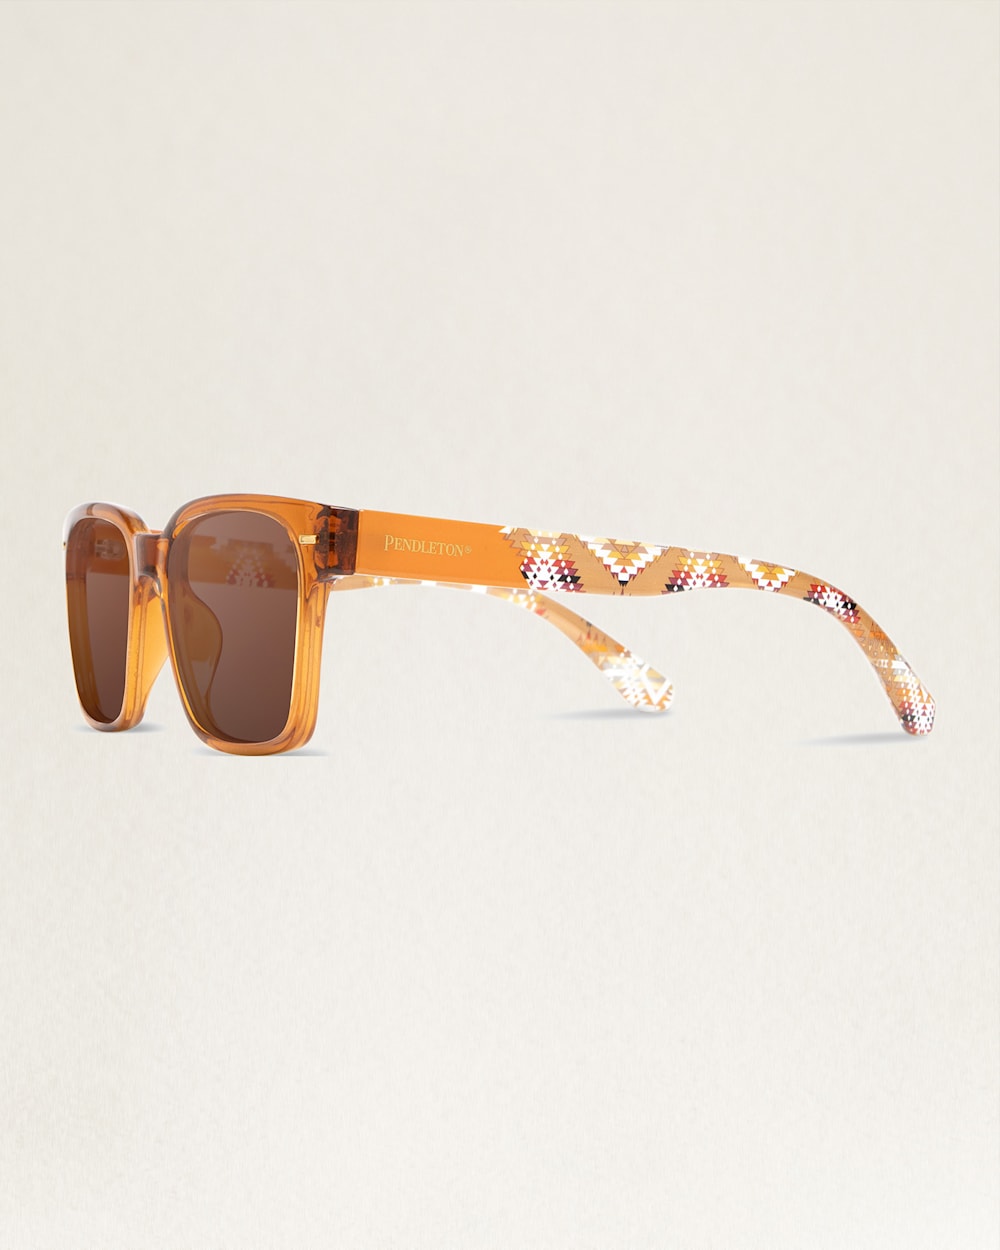 ALTERNATE VIEW OF SHWOOD X PENDLETON COBY POLARIZED SUNGLASSES IN BROWN CRYSTAL/TRAIL image number 3